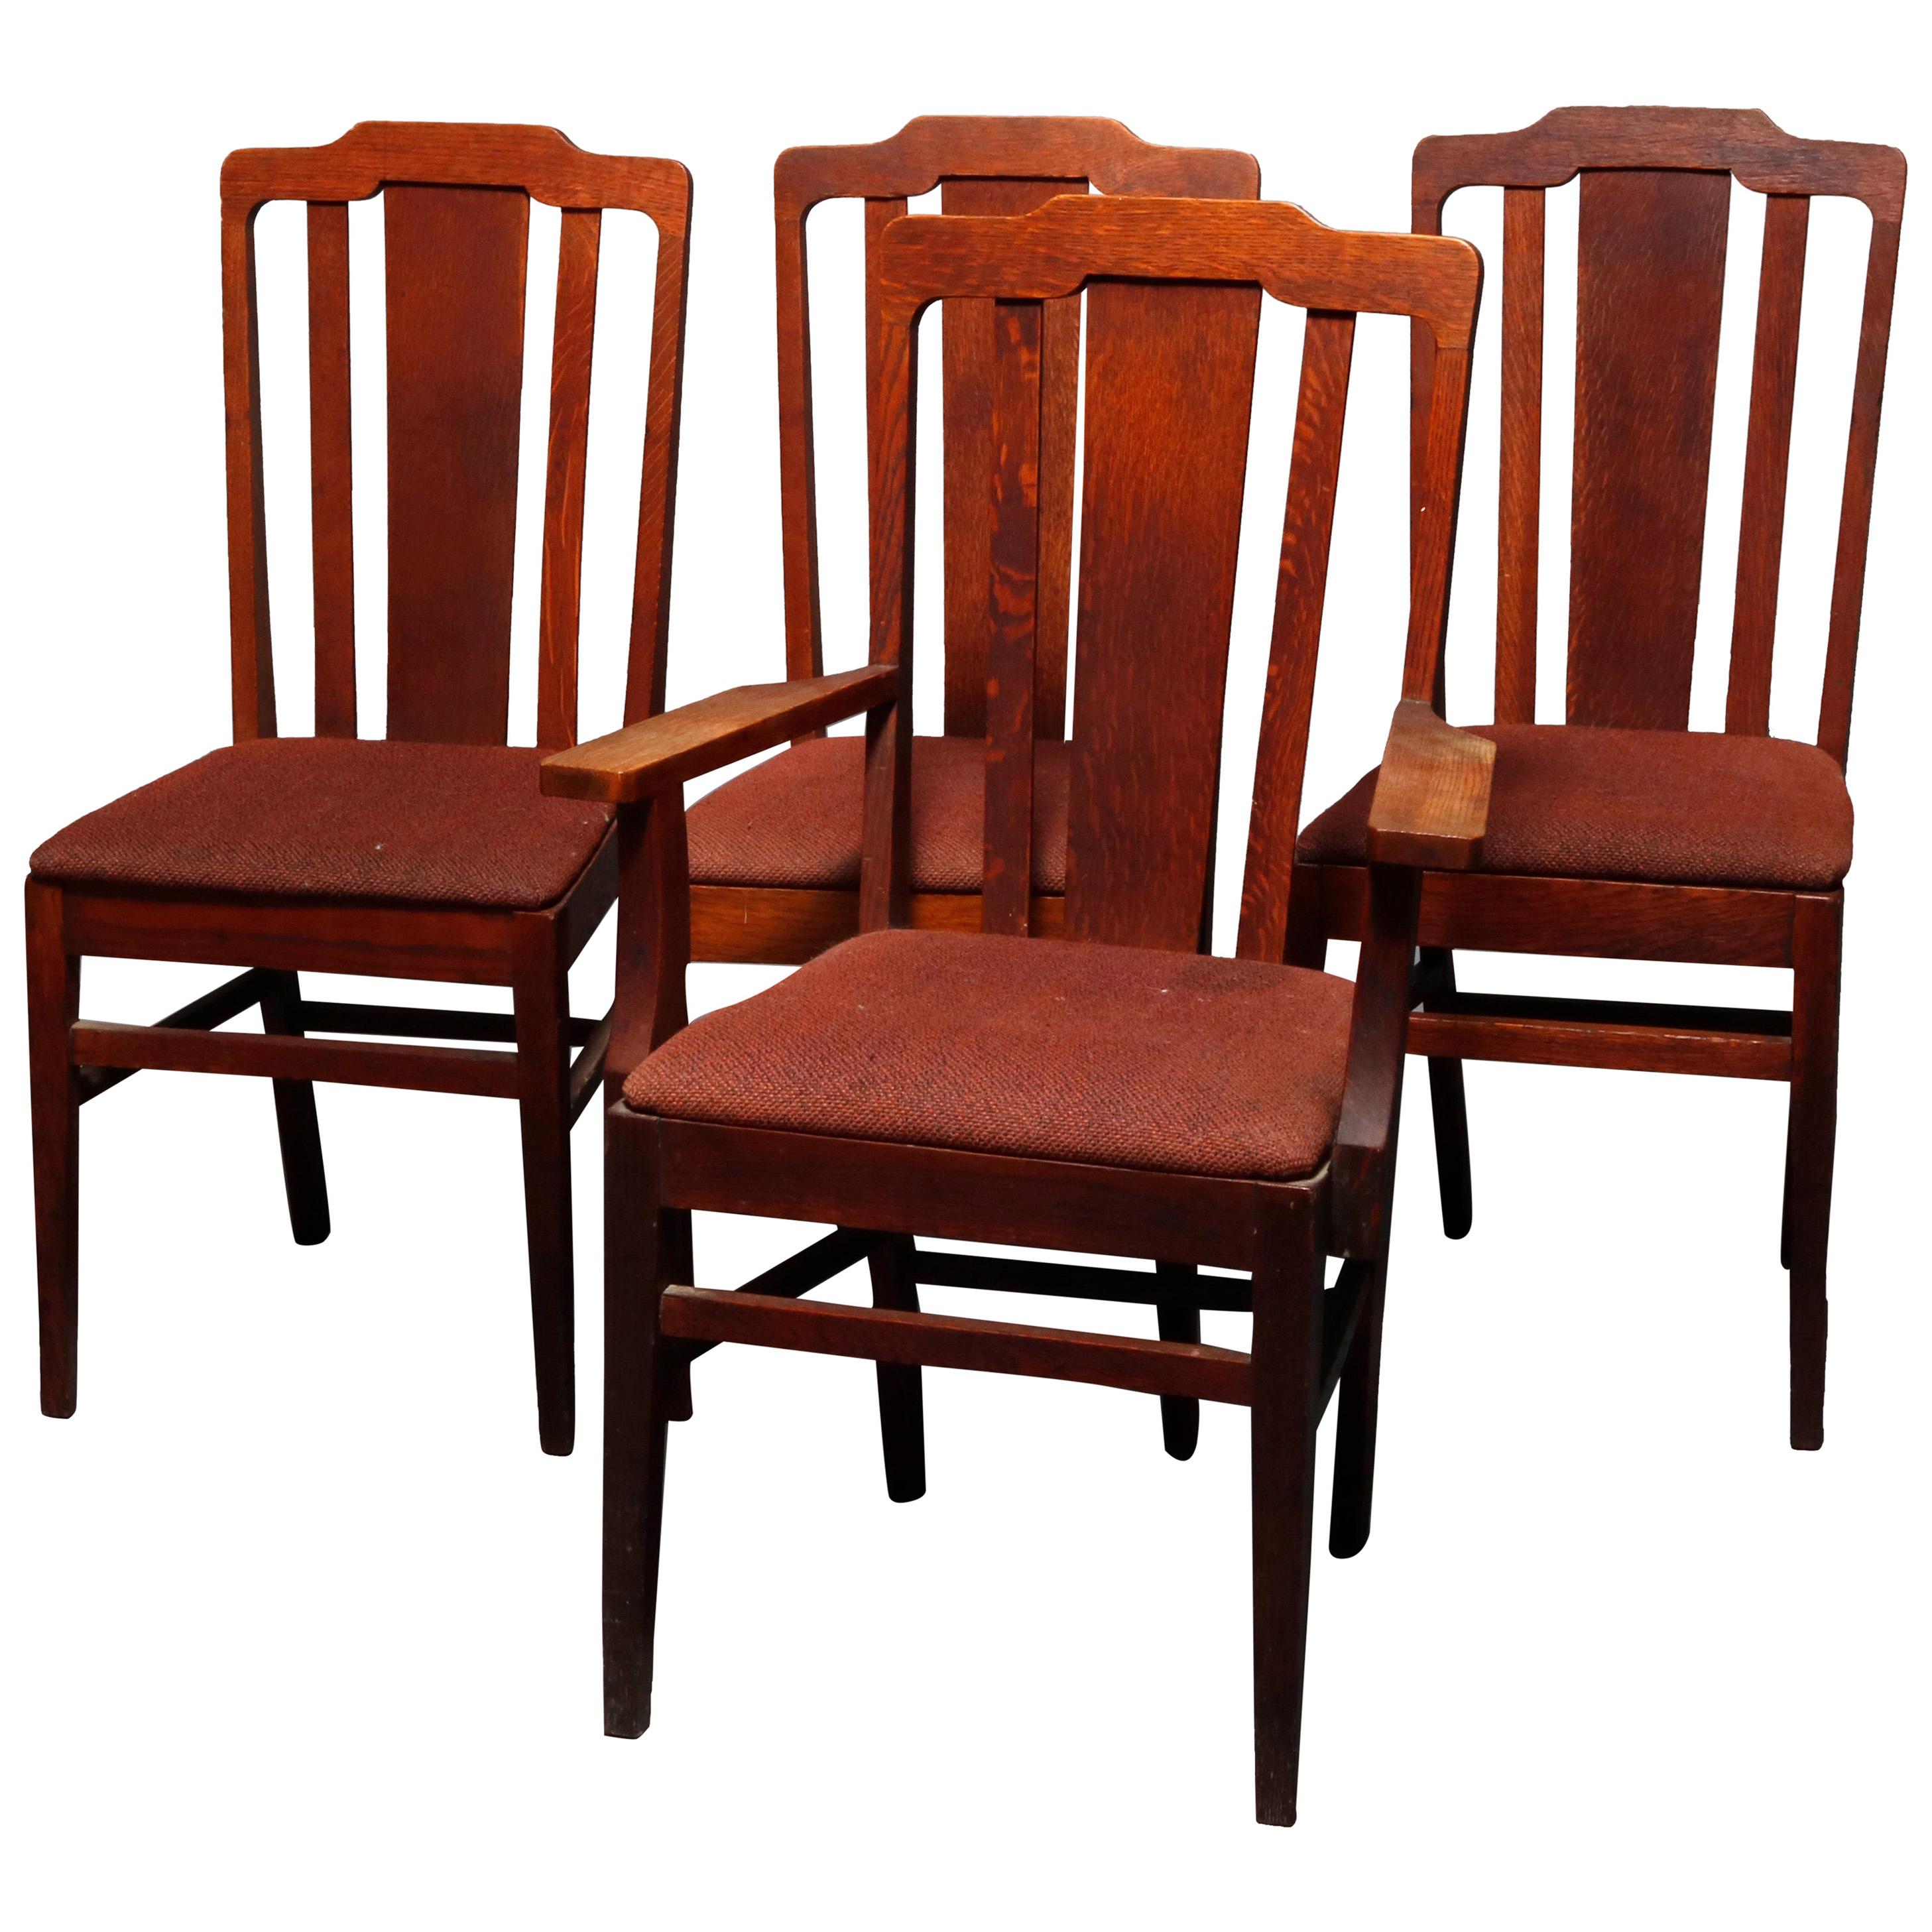 Four Antique Arts & Crafts Mission Oak Stickley School Dining Chairs, circa 1910